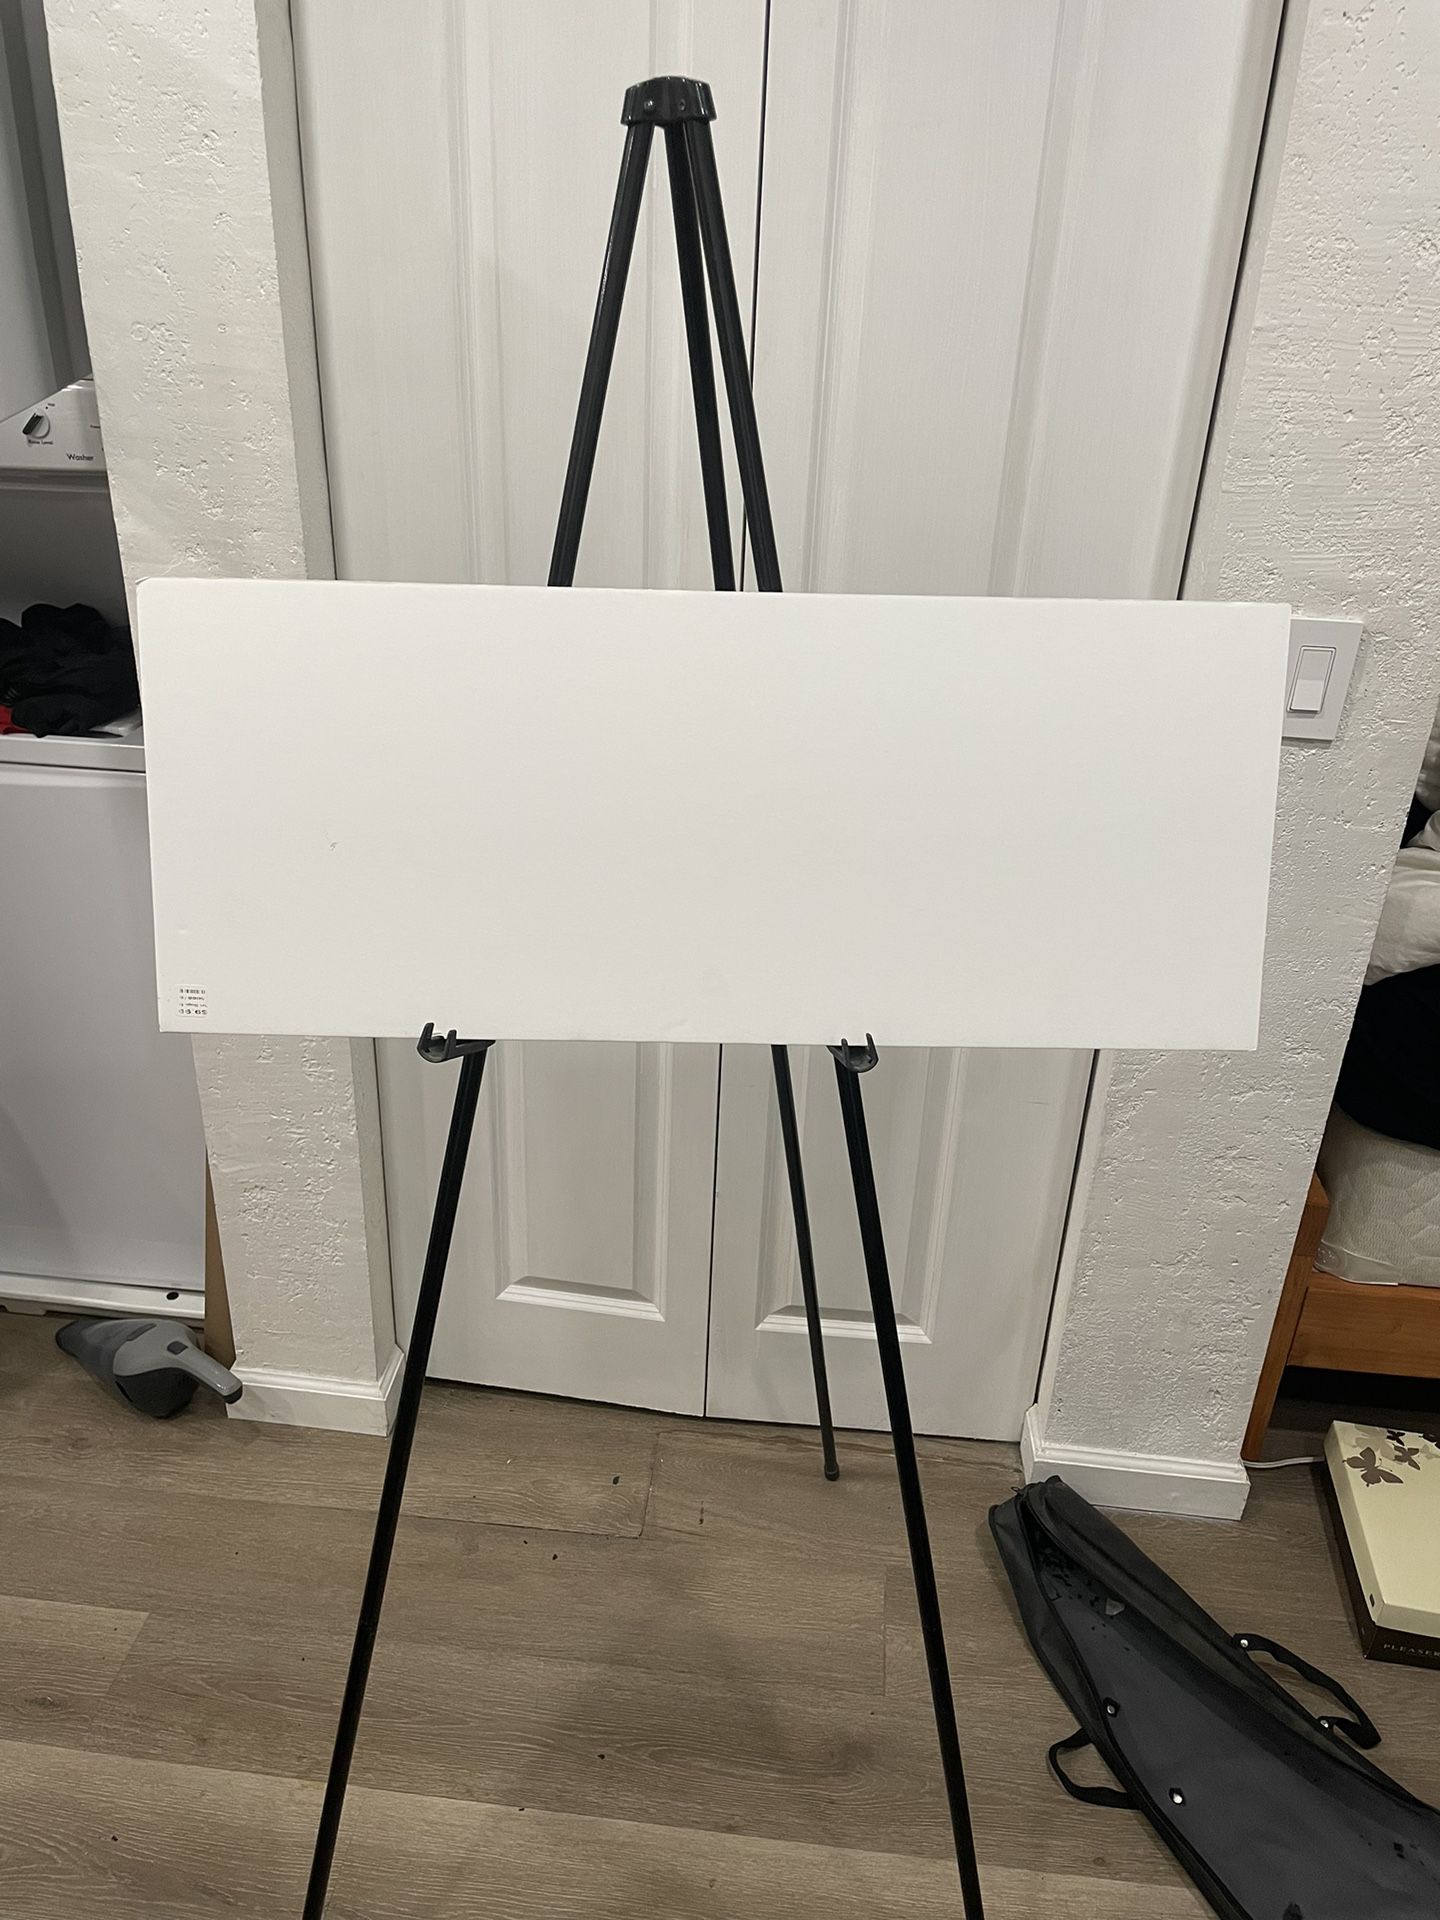 Easel for painting or display